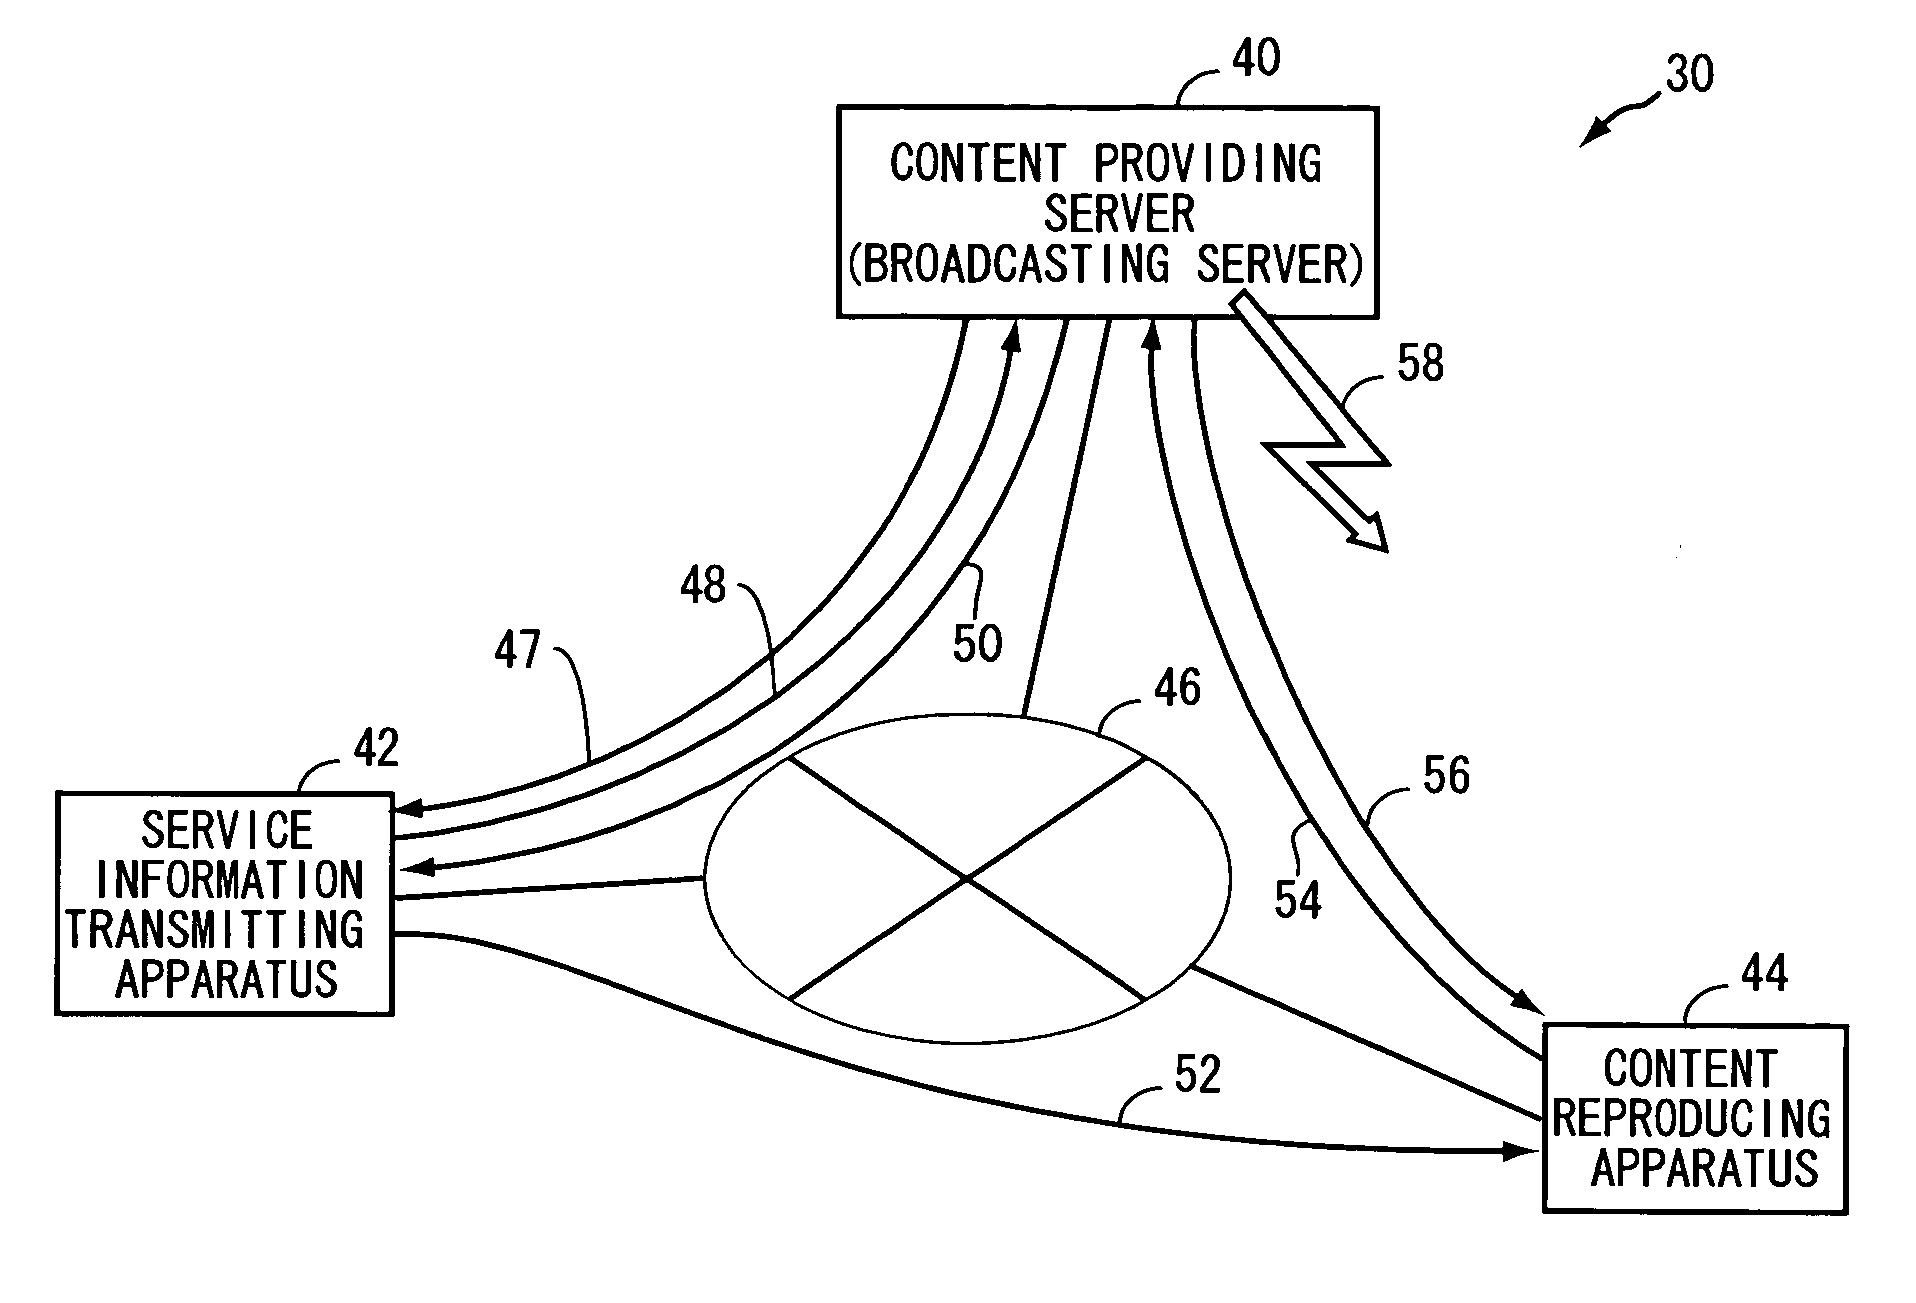 System for providing service related information to content reproducing apparatus